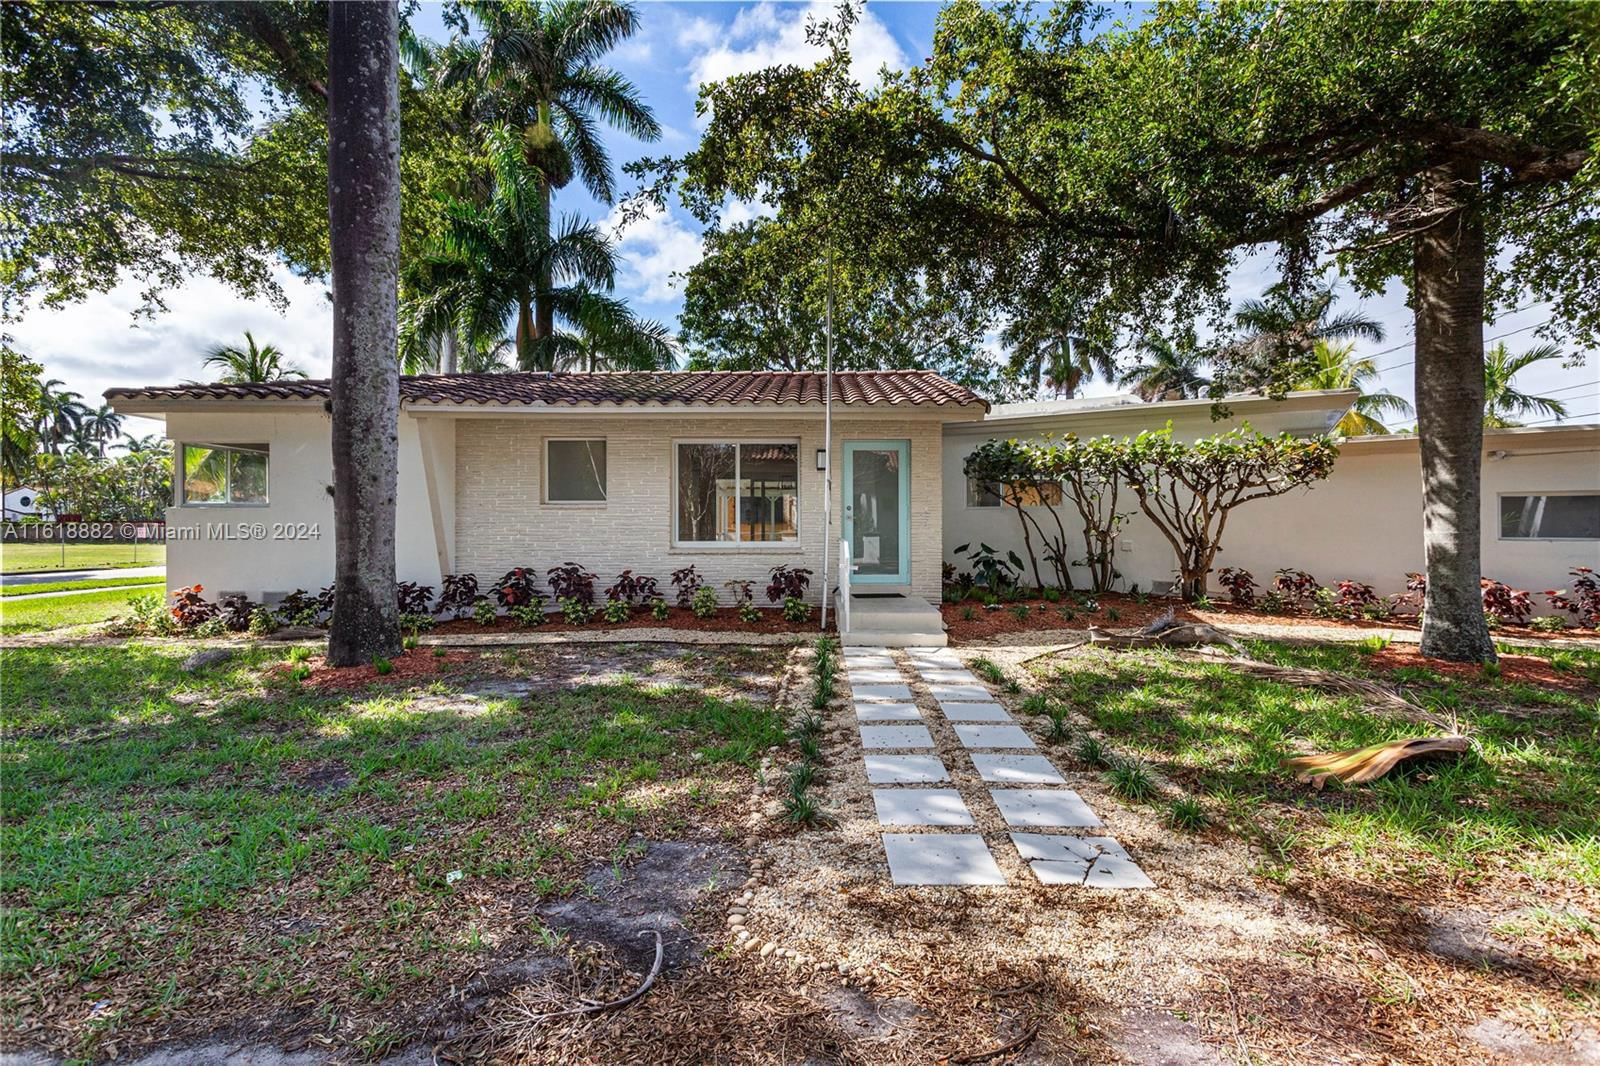 Real estate property located at 300 13th Ave, Broward County, HOLLYWOOD LAKES SECTION, Hollywood, FL